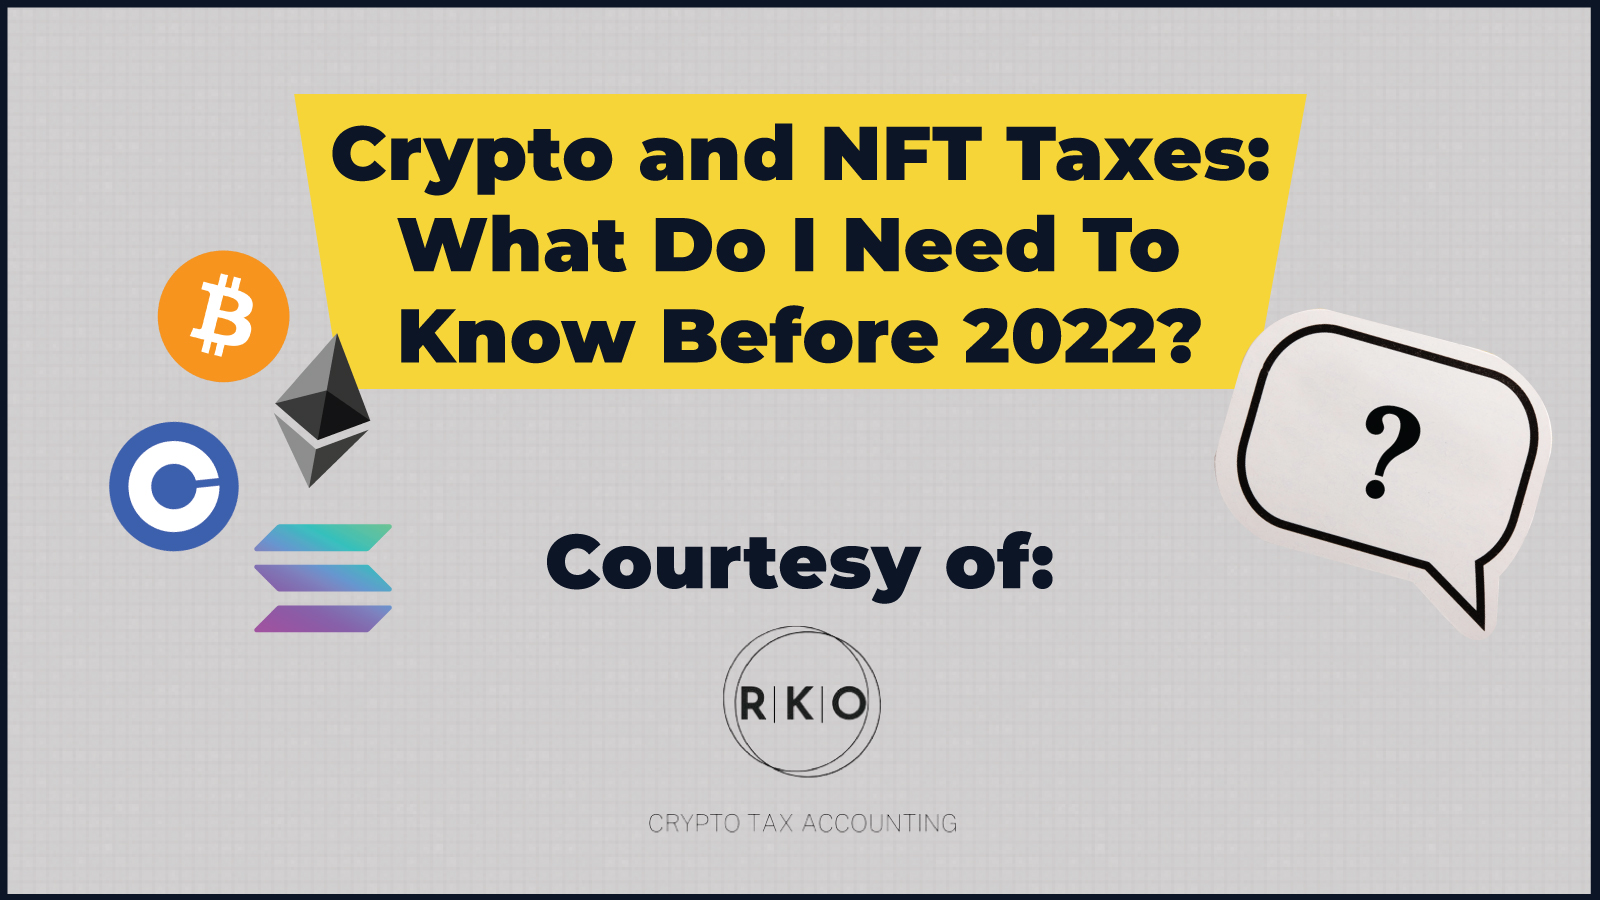 Crypto and NFT Taxes: What Do I Need To Know Before 2022?